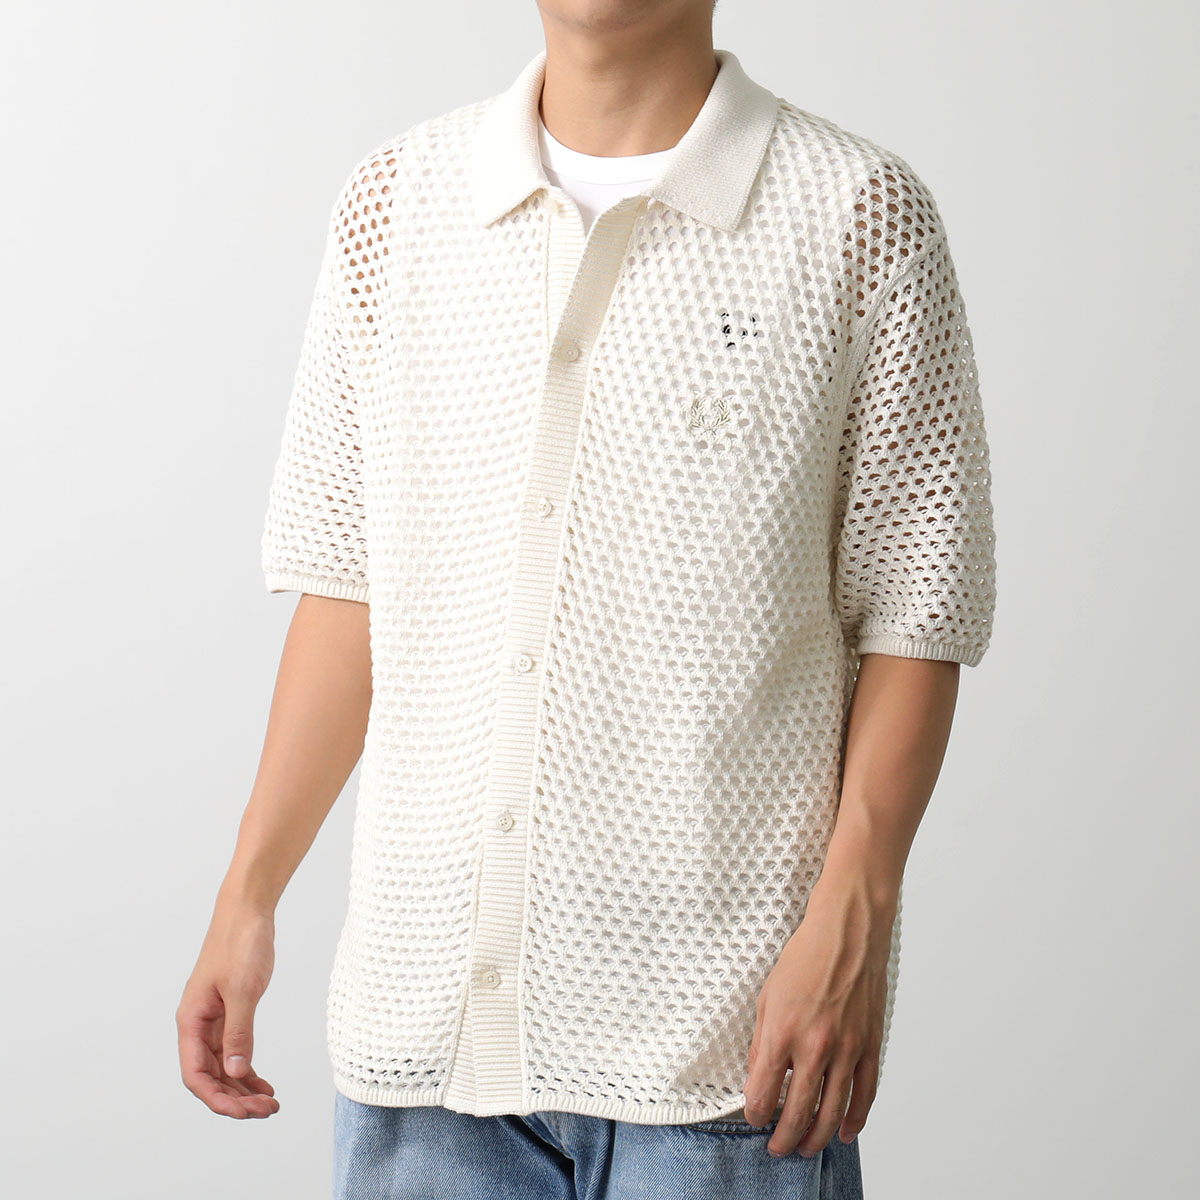 FRED PERRY ニットポロシャツ LACE BUTTON THROUGH SHIRT K785...